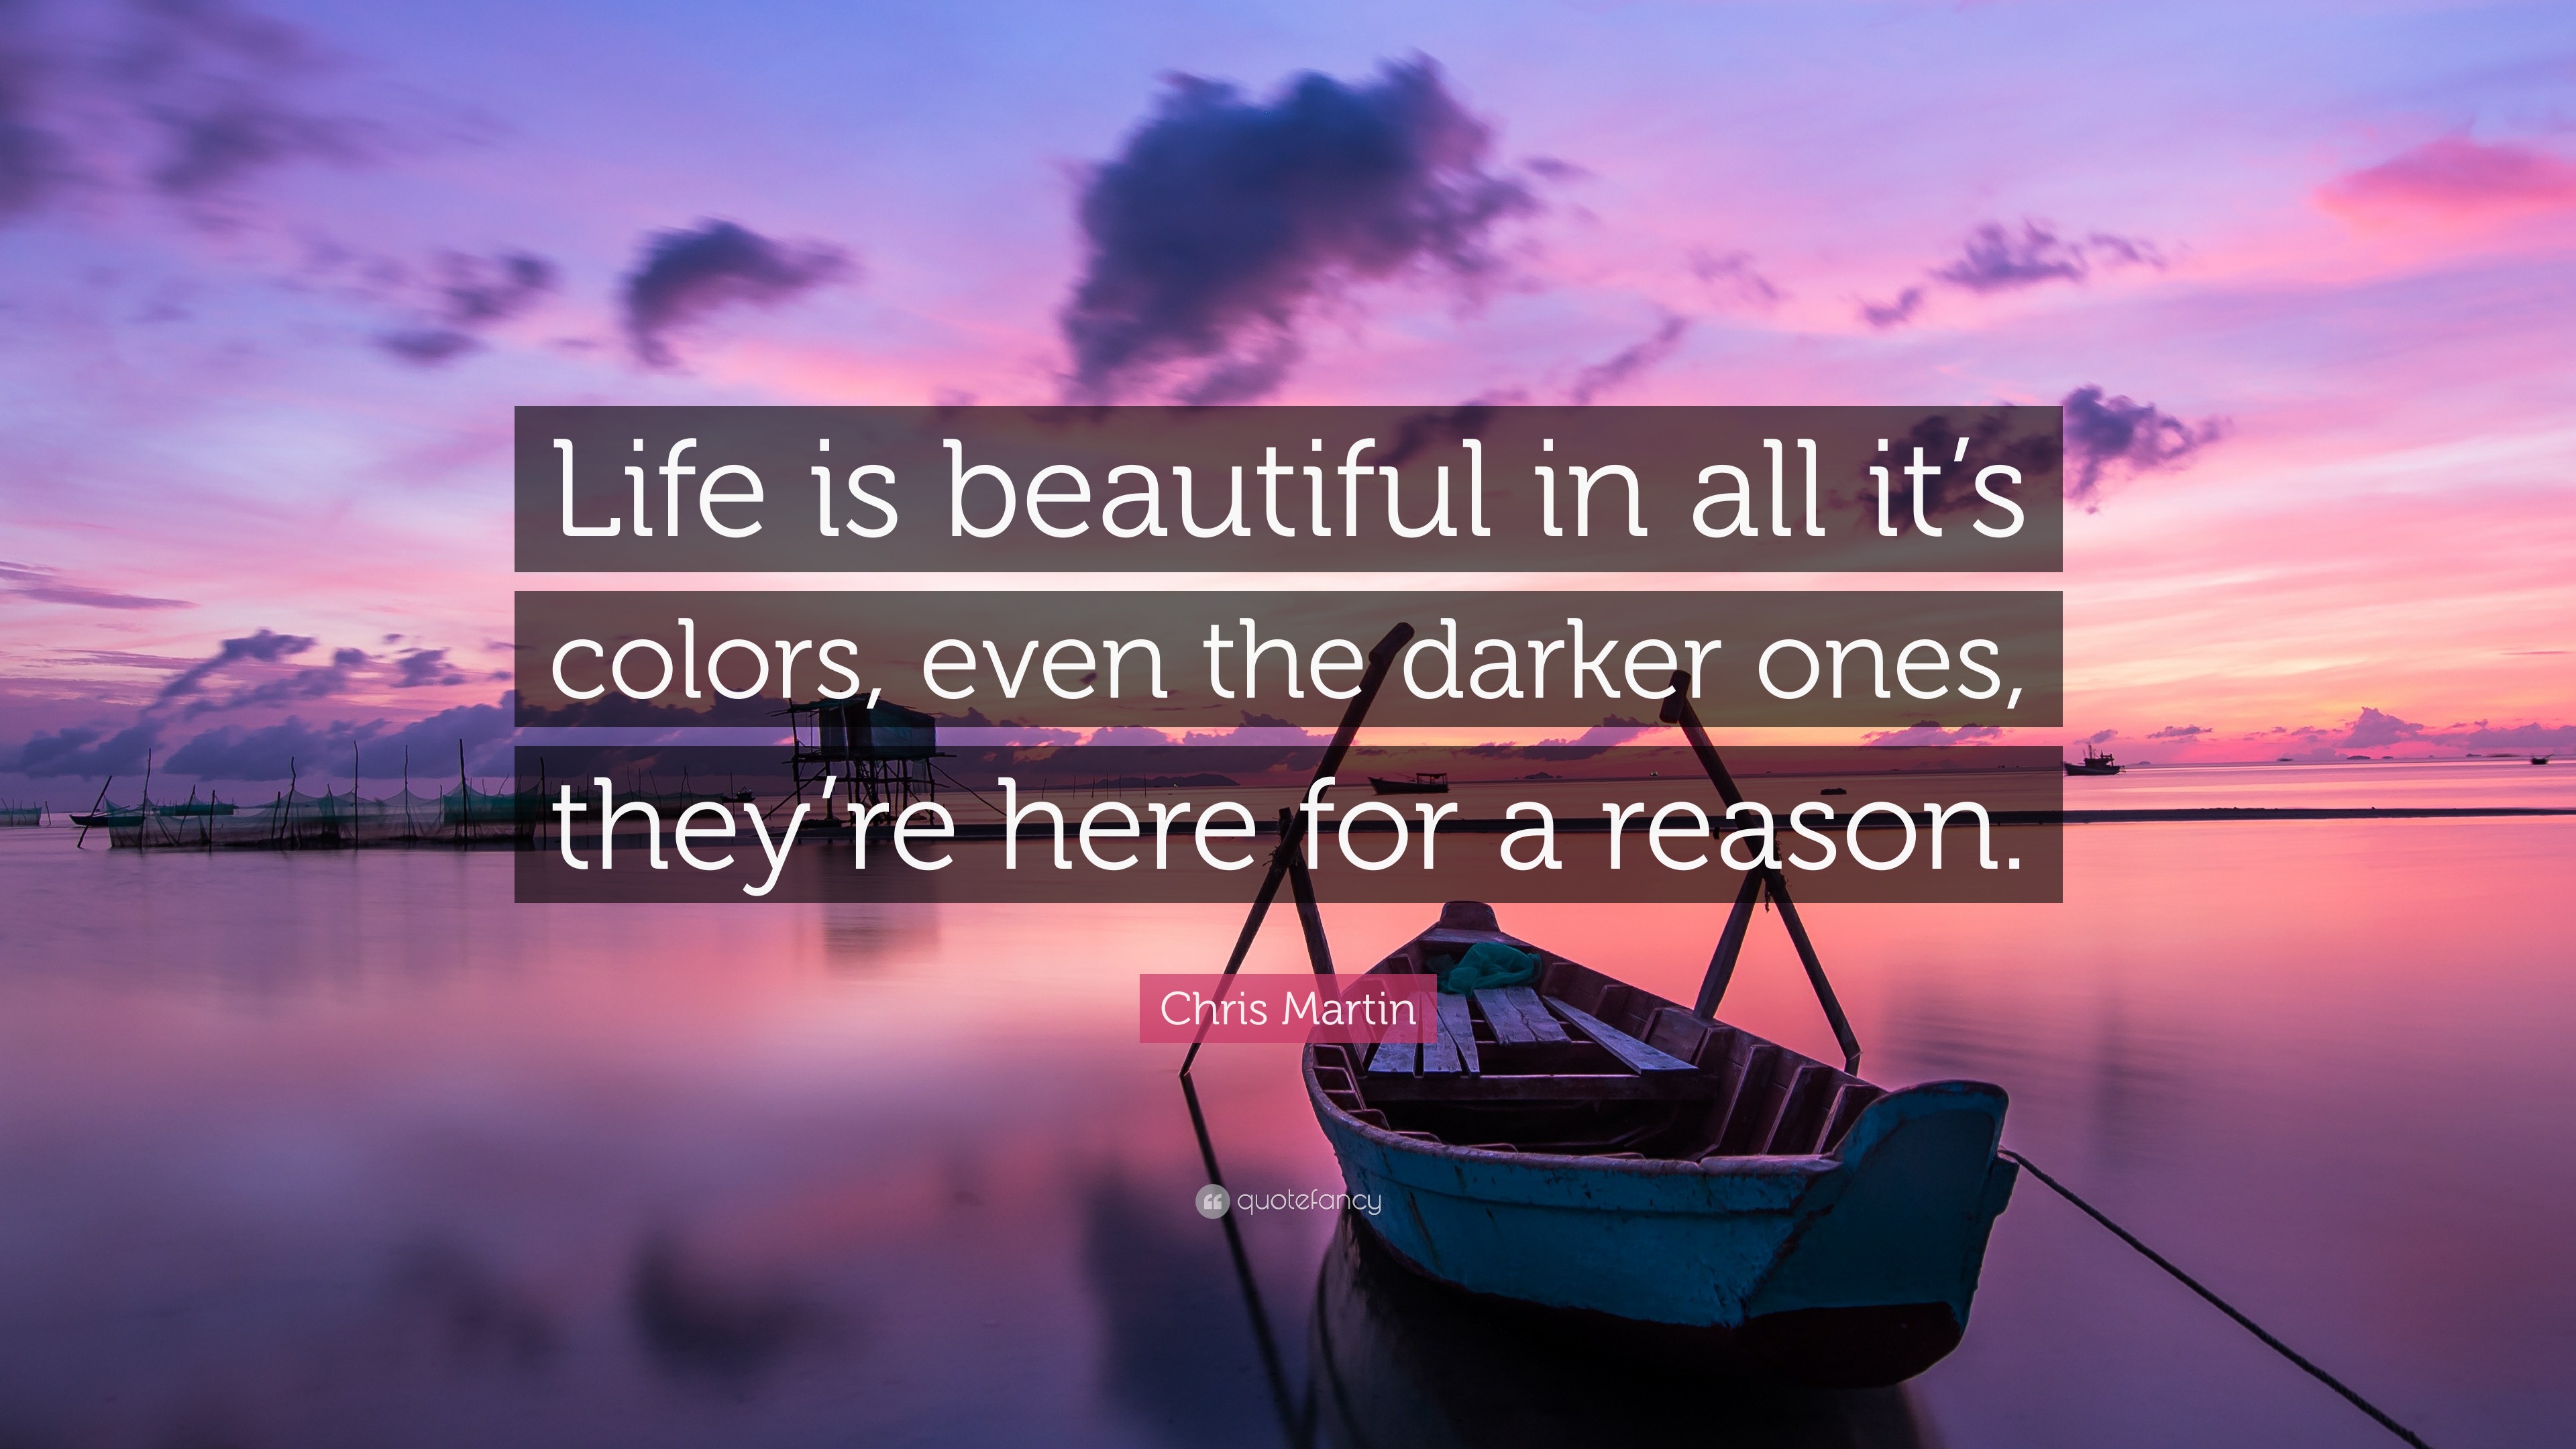 Chris Martin Quote “Life is beautiful in all it’s colors